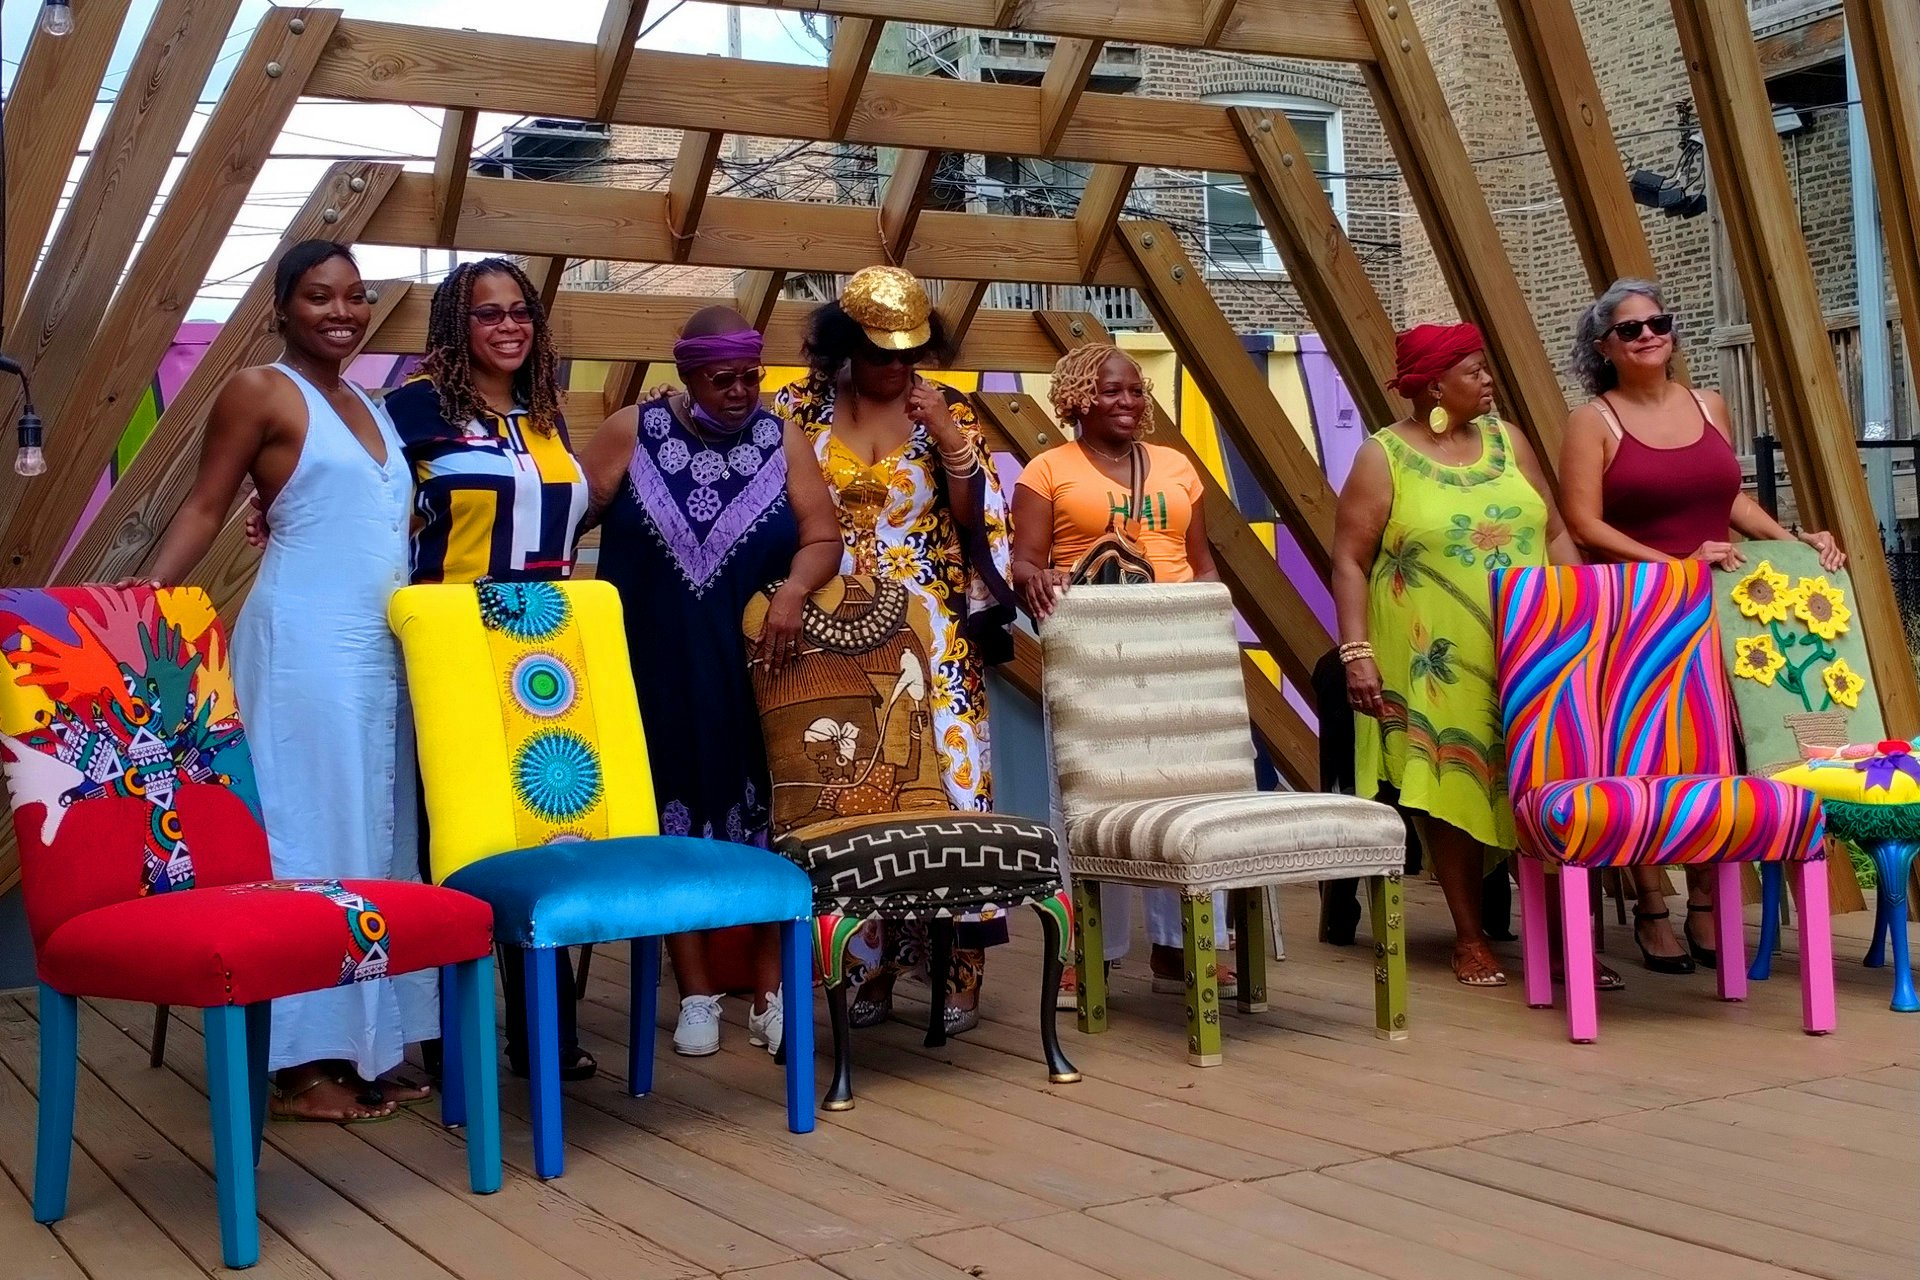 artists posing with the chairs they created